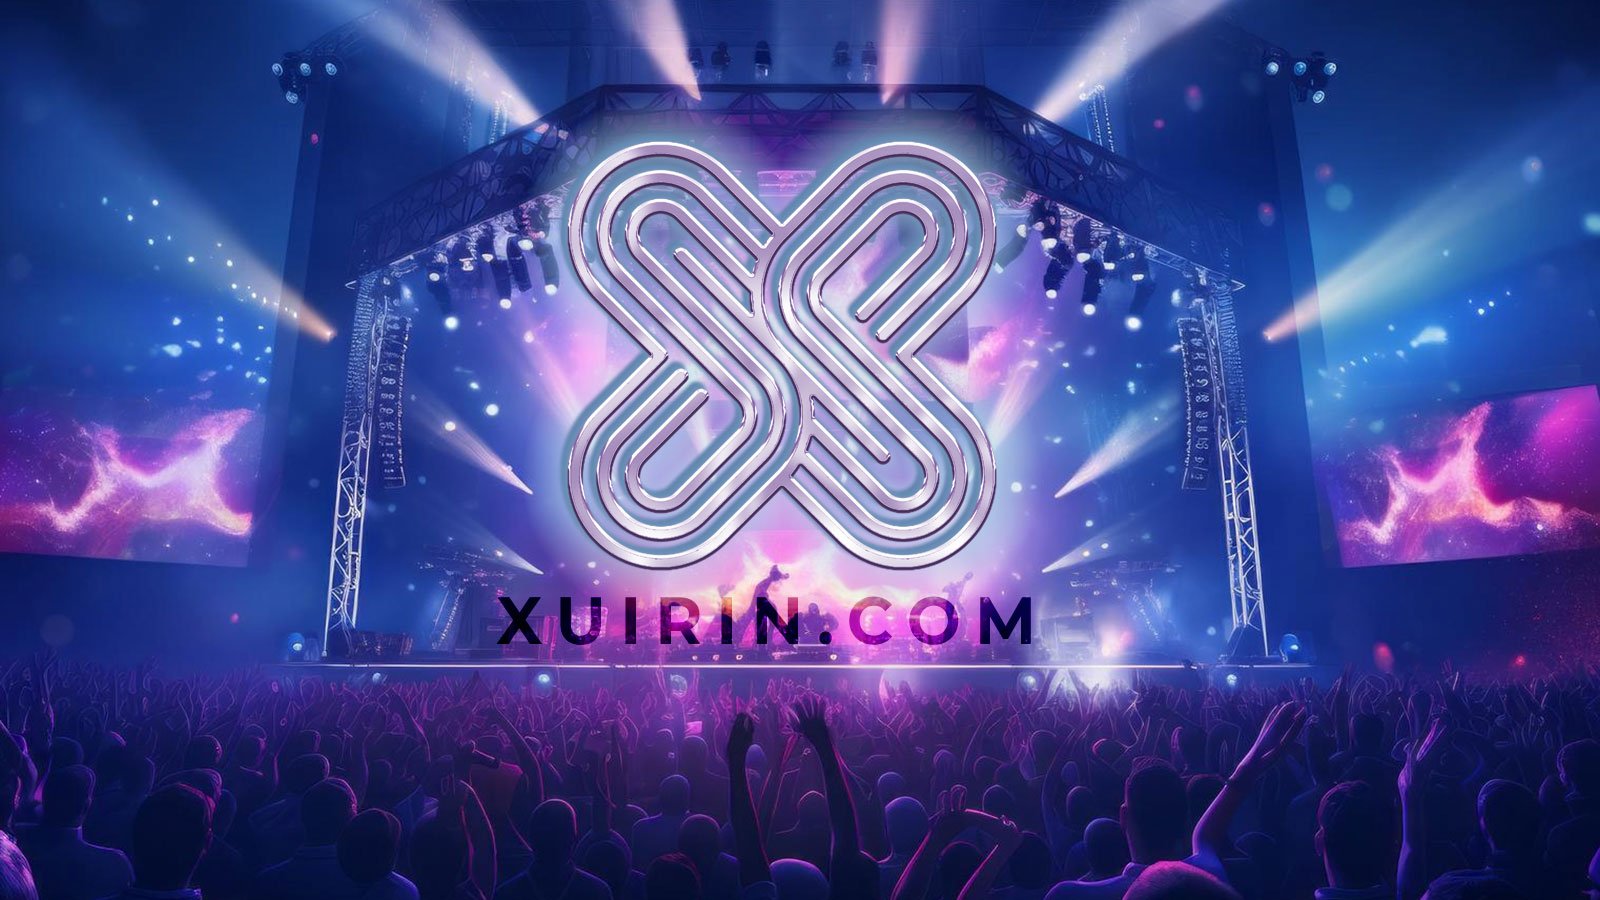 Xuirin - The Revolution in Decentralized Finance. Top Points to Know about the New DeFi Platform